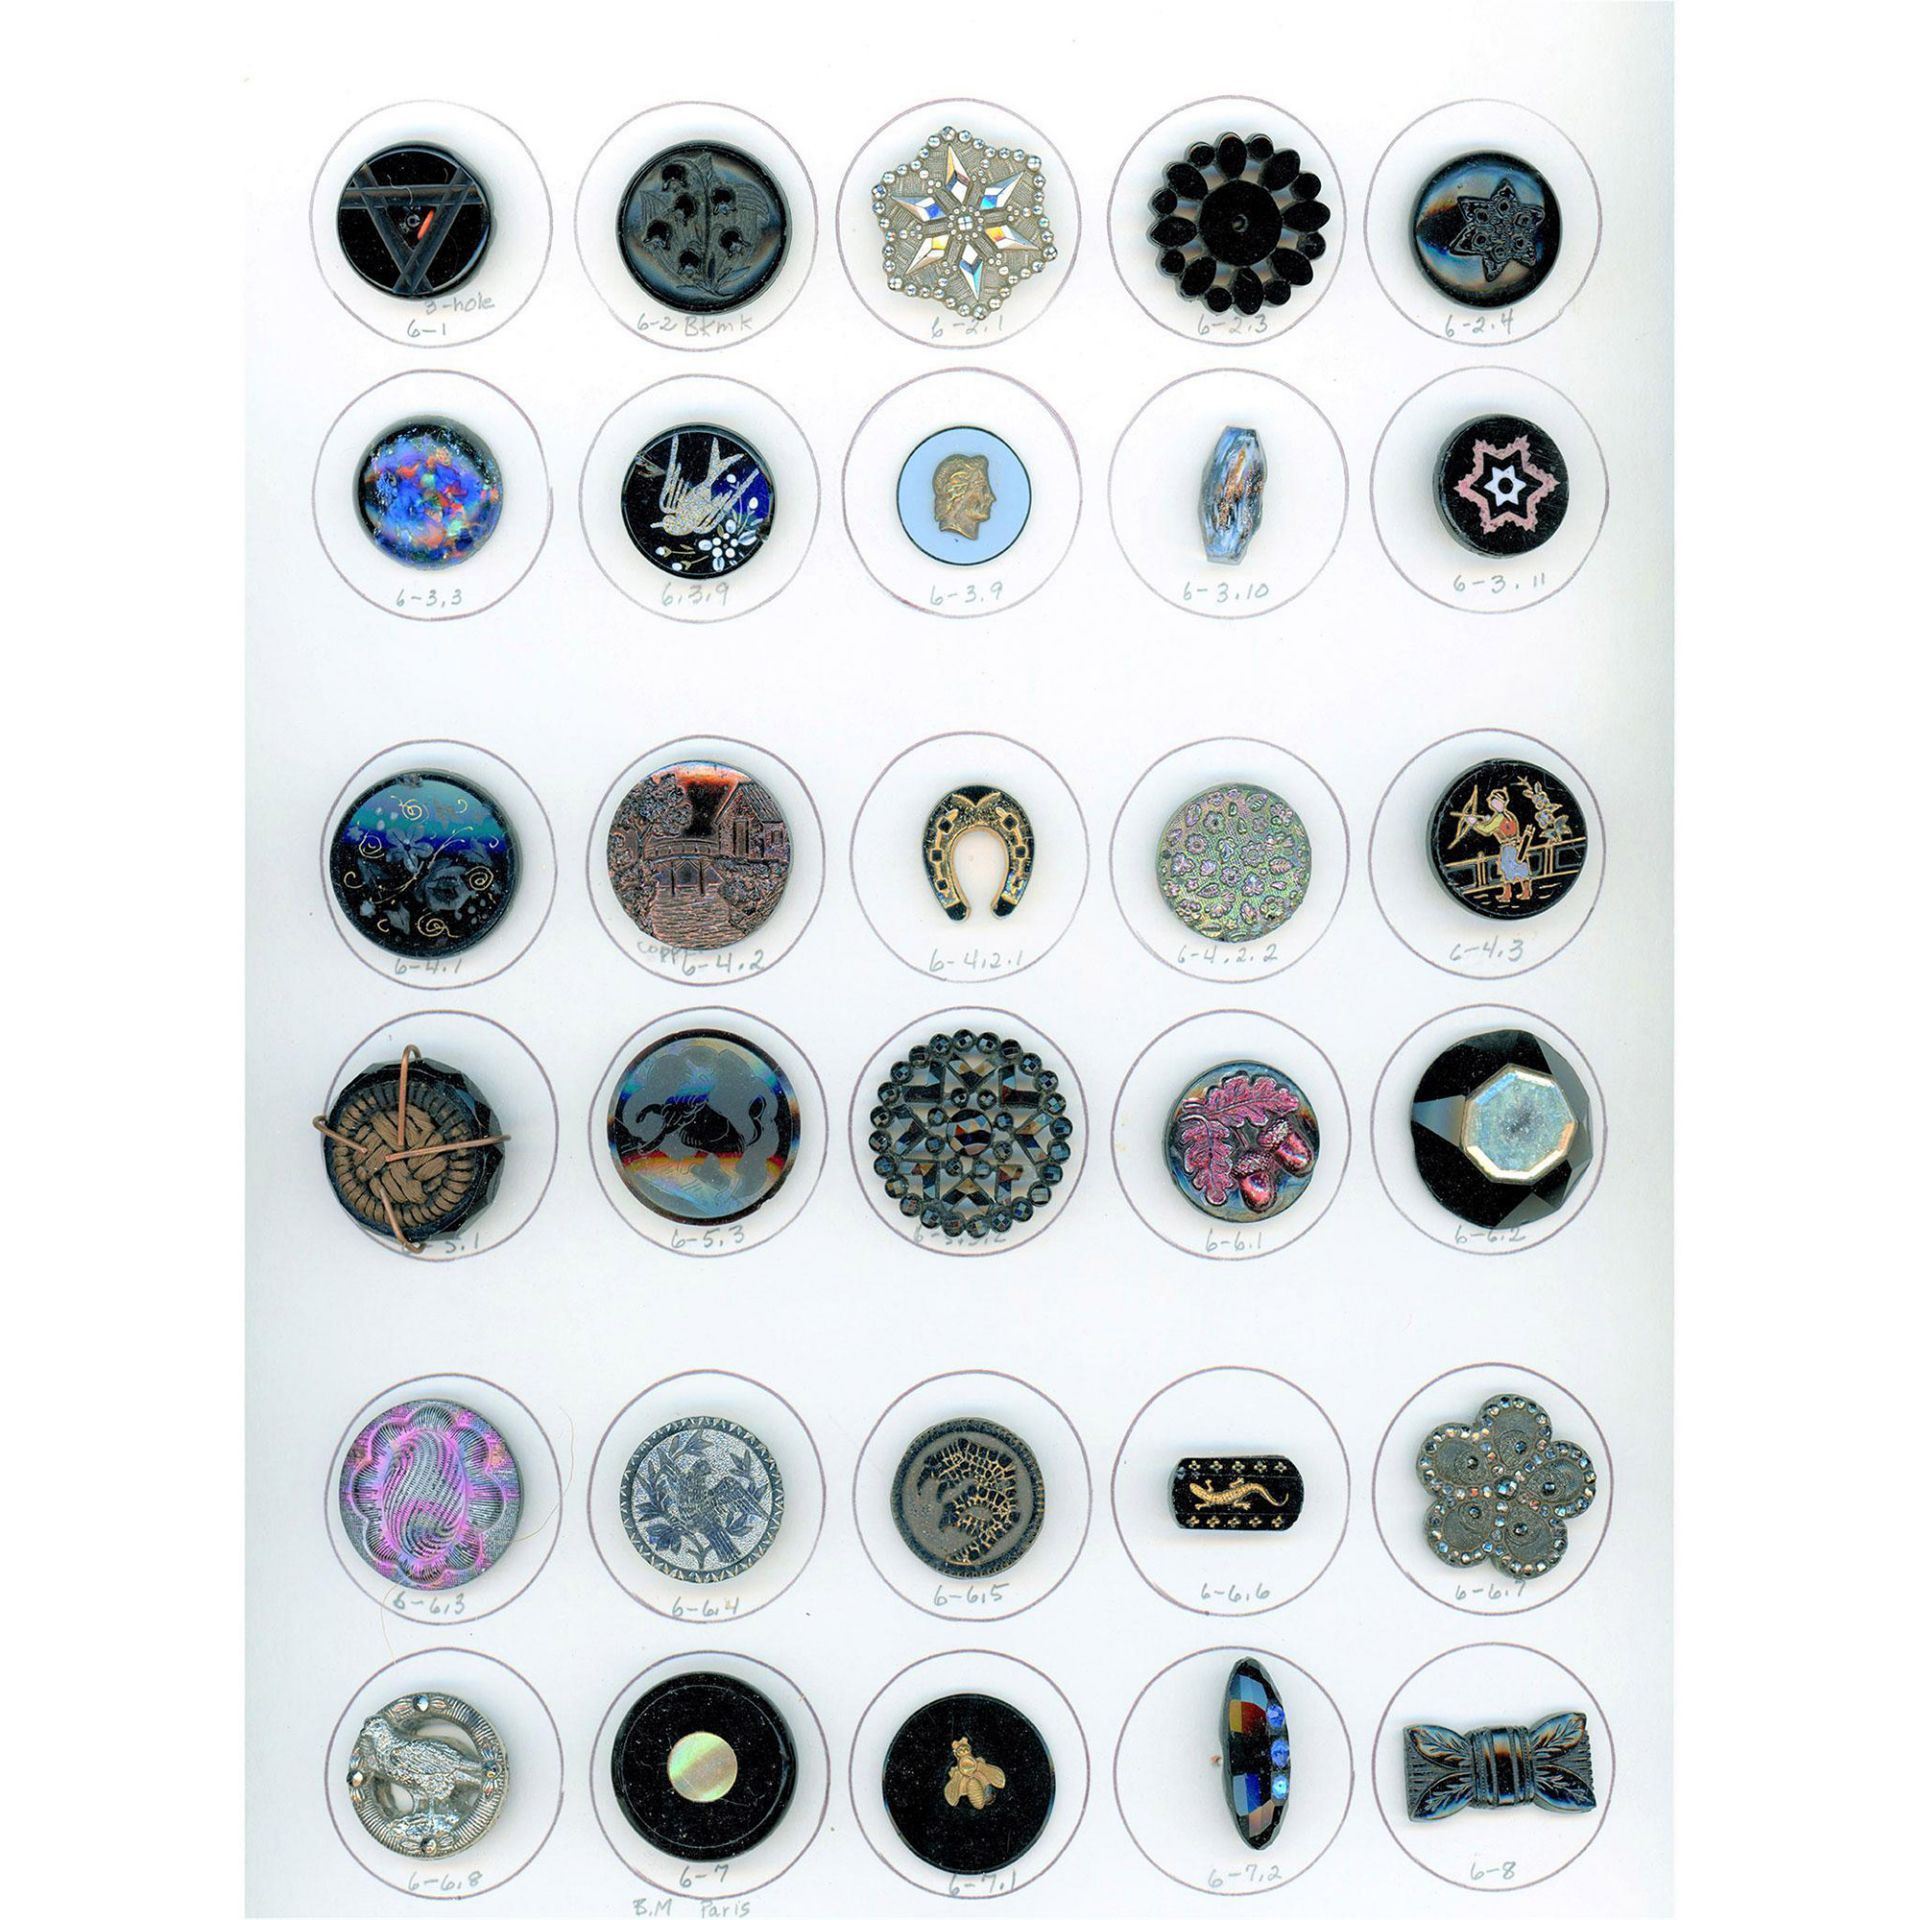 A Card of Division One Assorted Black Glass Buttons